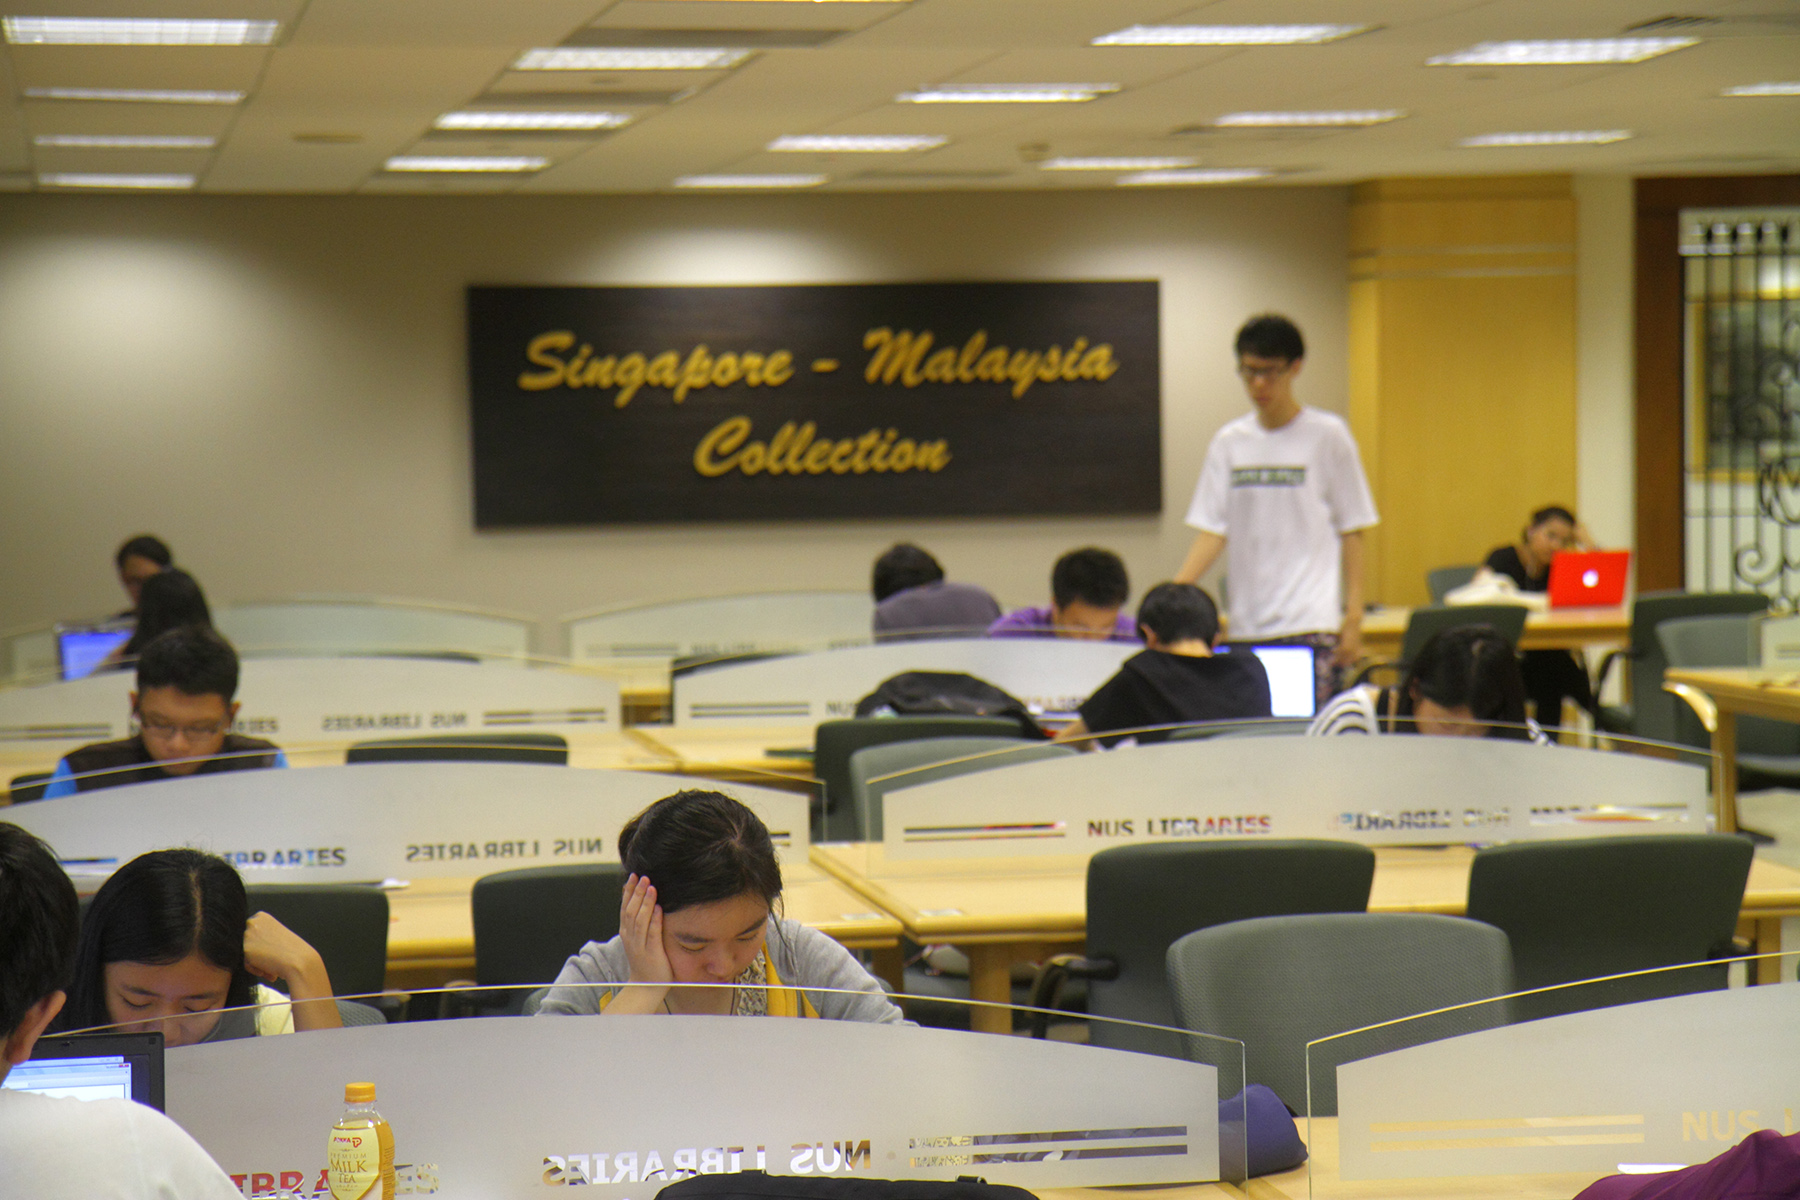 Group of students studying at tables with laptops, Central Library at the National University of Singapore